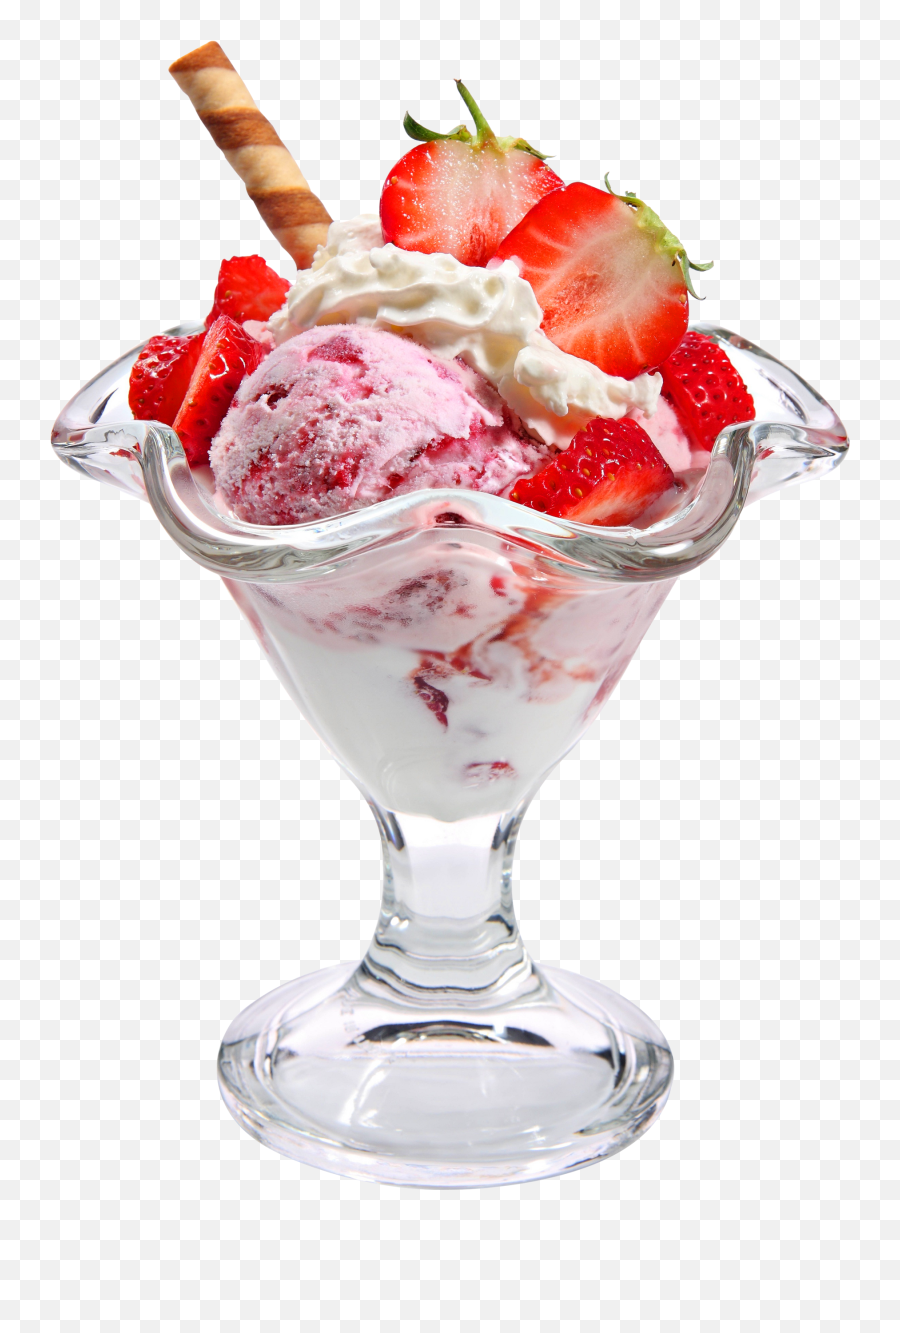 Download Ice Cream Png Image - Png Strawberry Ice Cream Scoop,Ice Cream Png Transparent